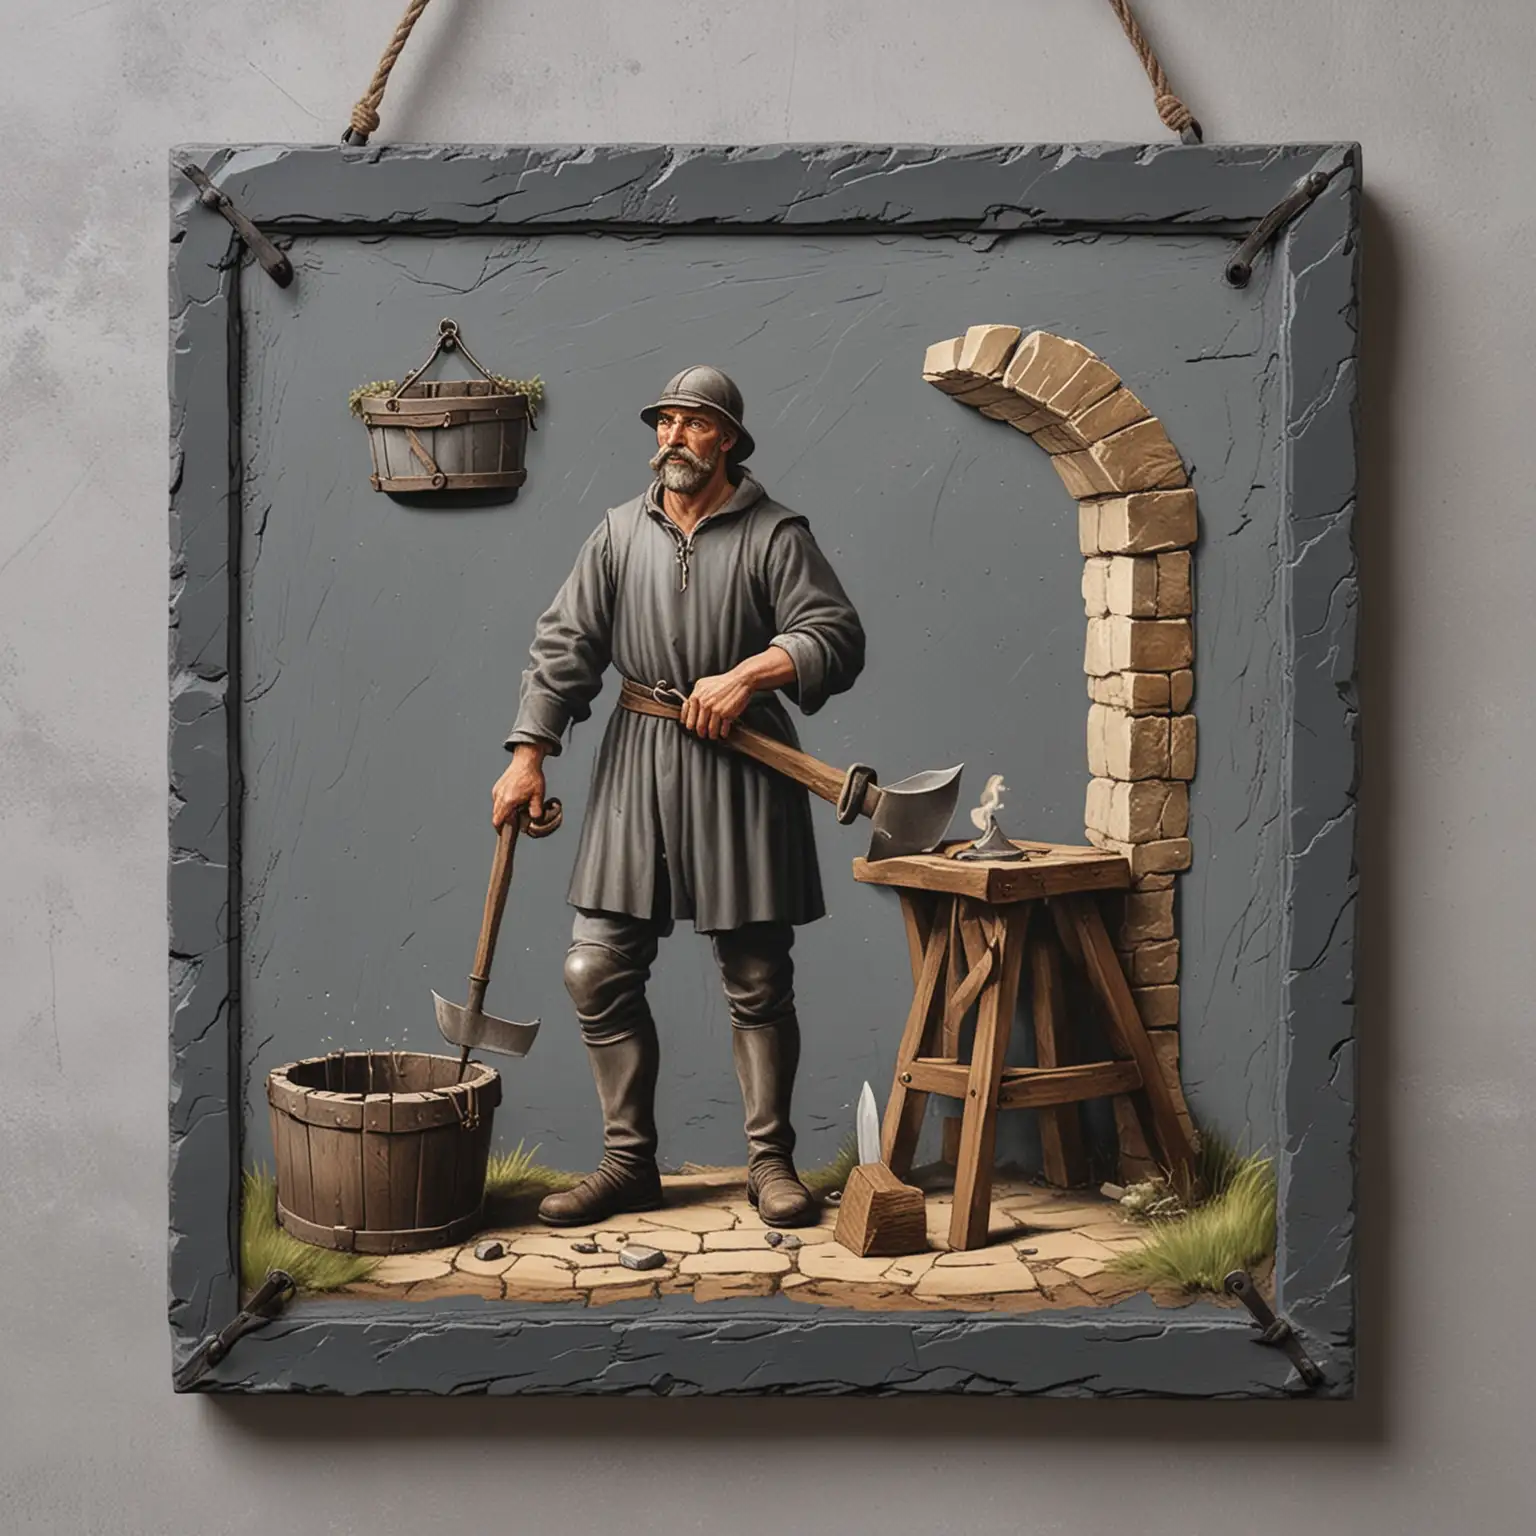 Pictorial sign with slate background depicting a medieval Blacksmith in a square surround